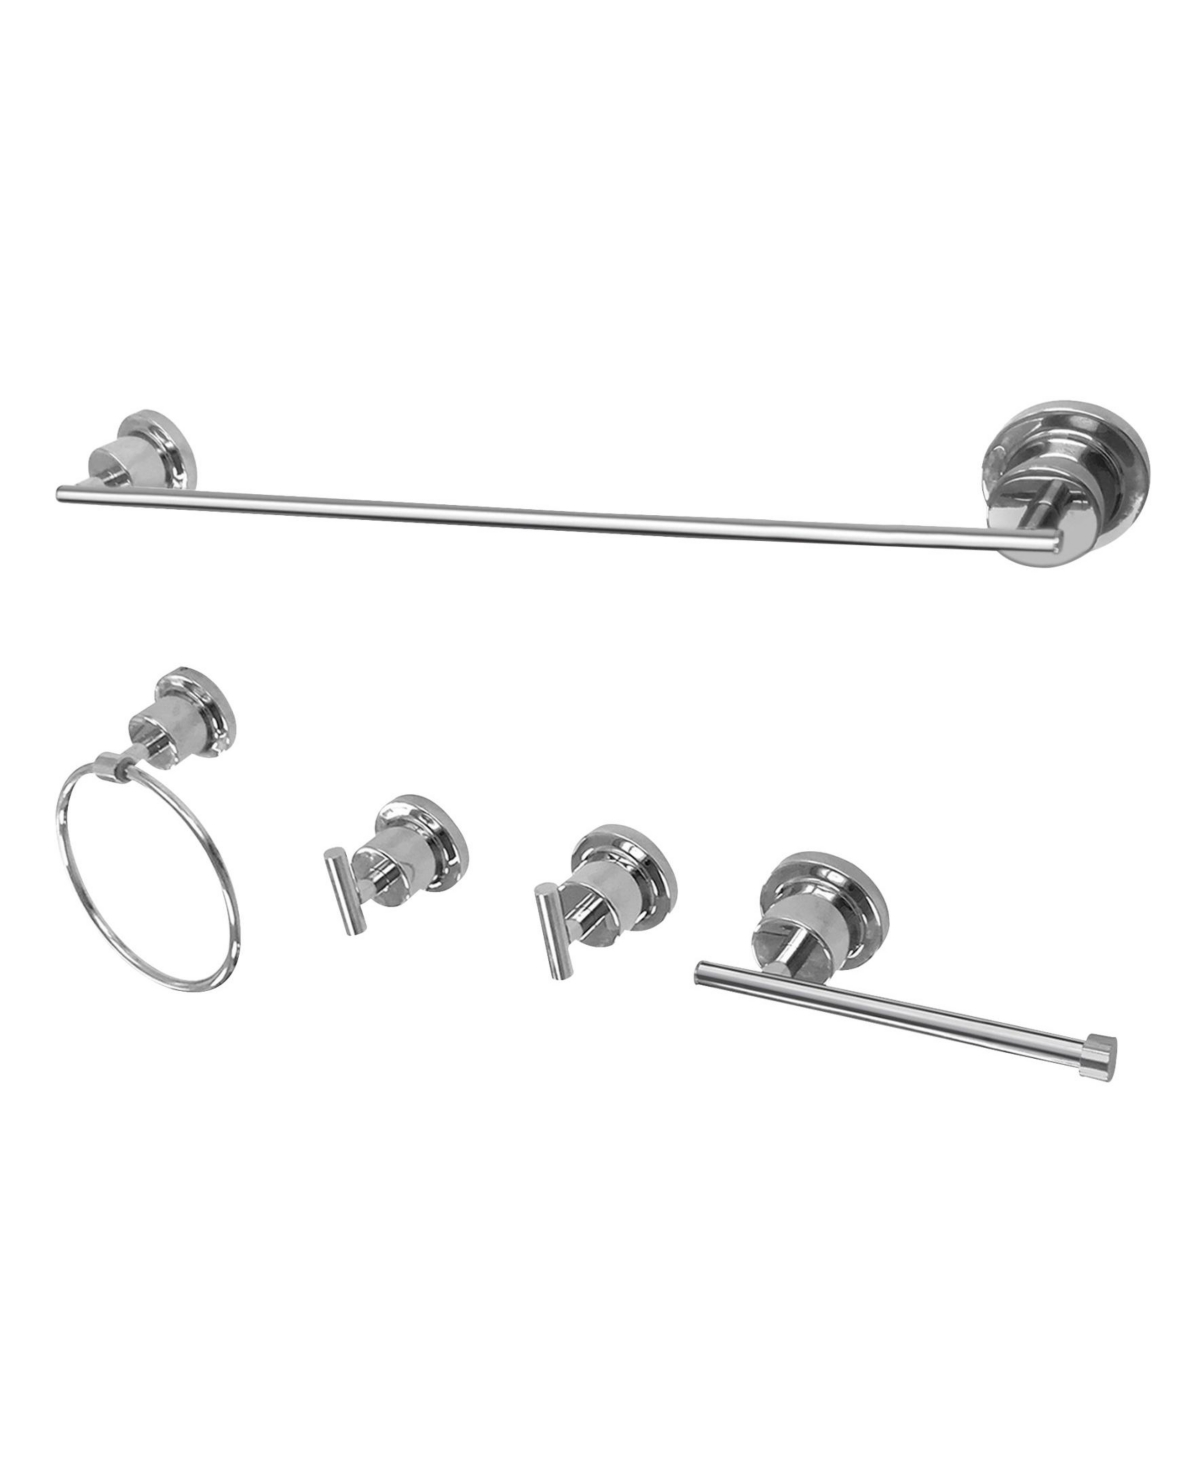 Kingston Brass Concord 5-Pc. Bathroom Accessory Set in Polished Chrome Bedding